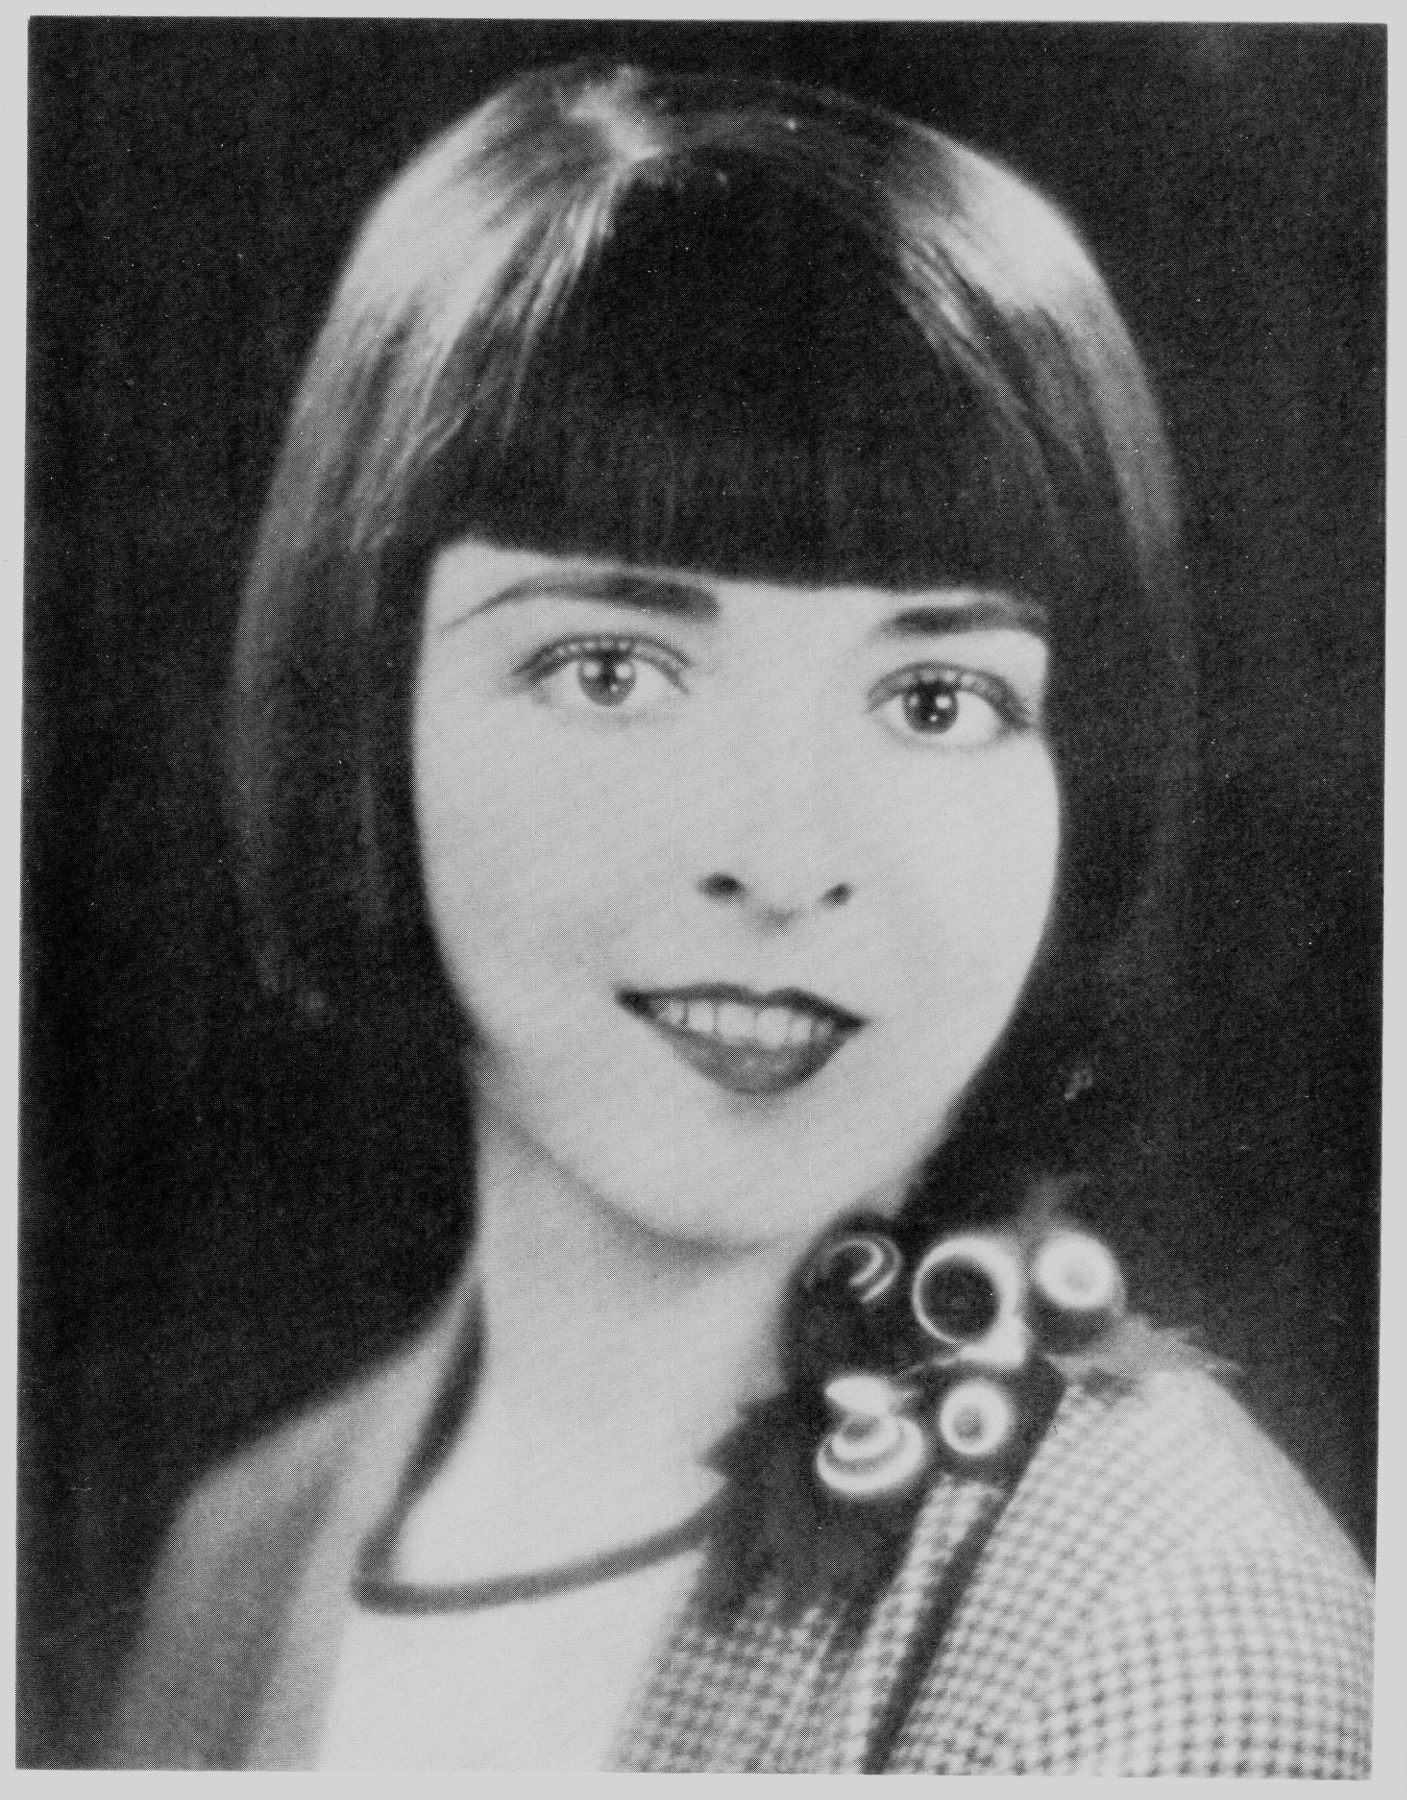 A Man and A Mouse: How Colleen Moore Broke Into The Movies